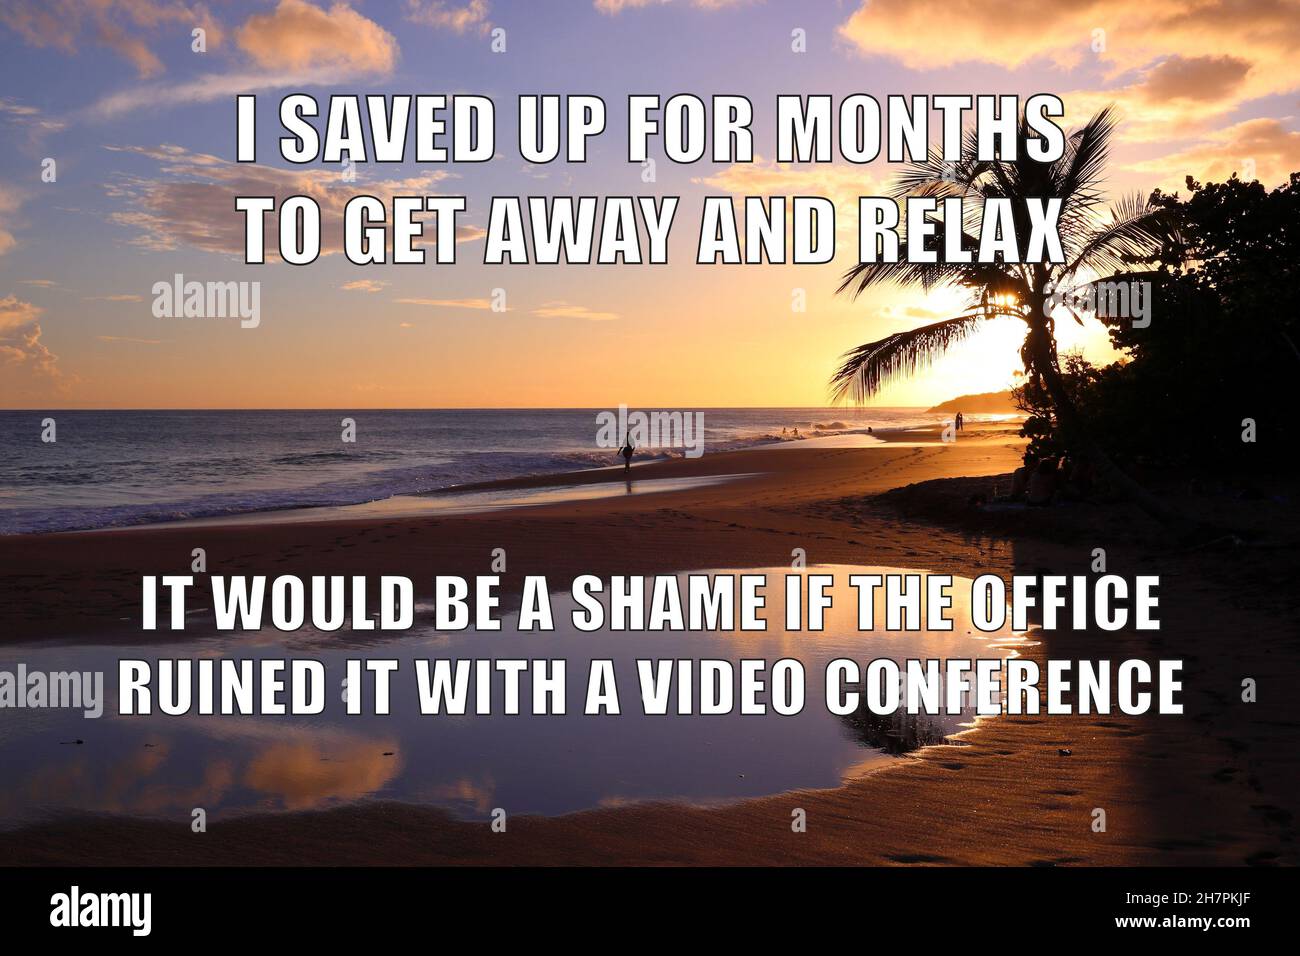 Vacation vs work stress funny meme for social media sharing. Office video  conferencing vs relax - workplace memes Stock Photo - Alamy